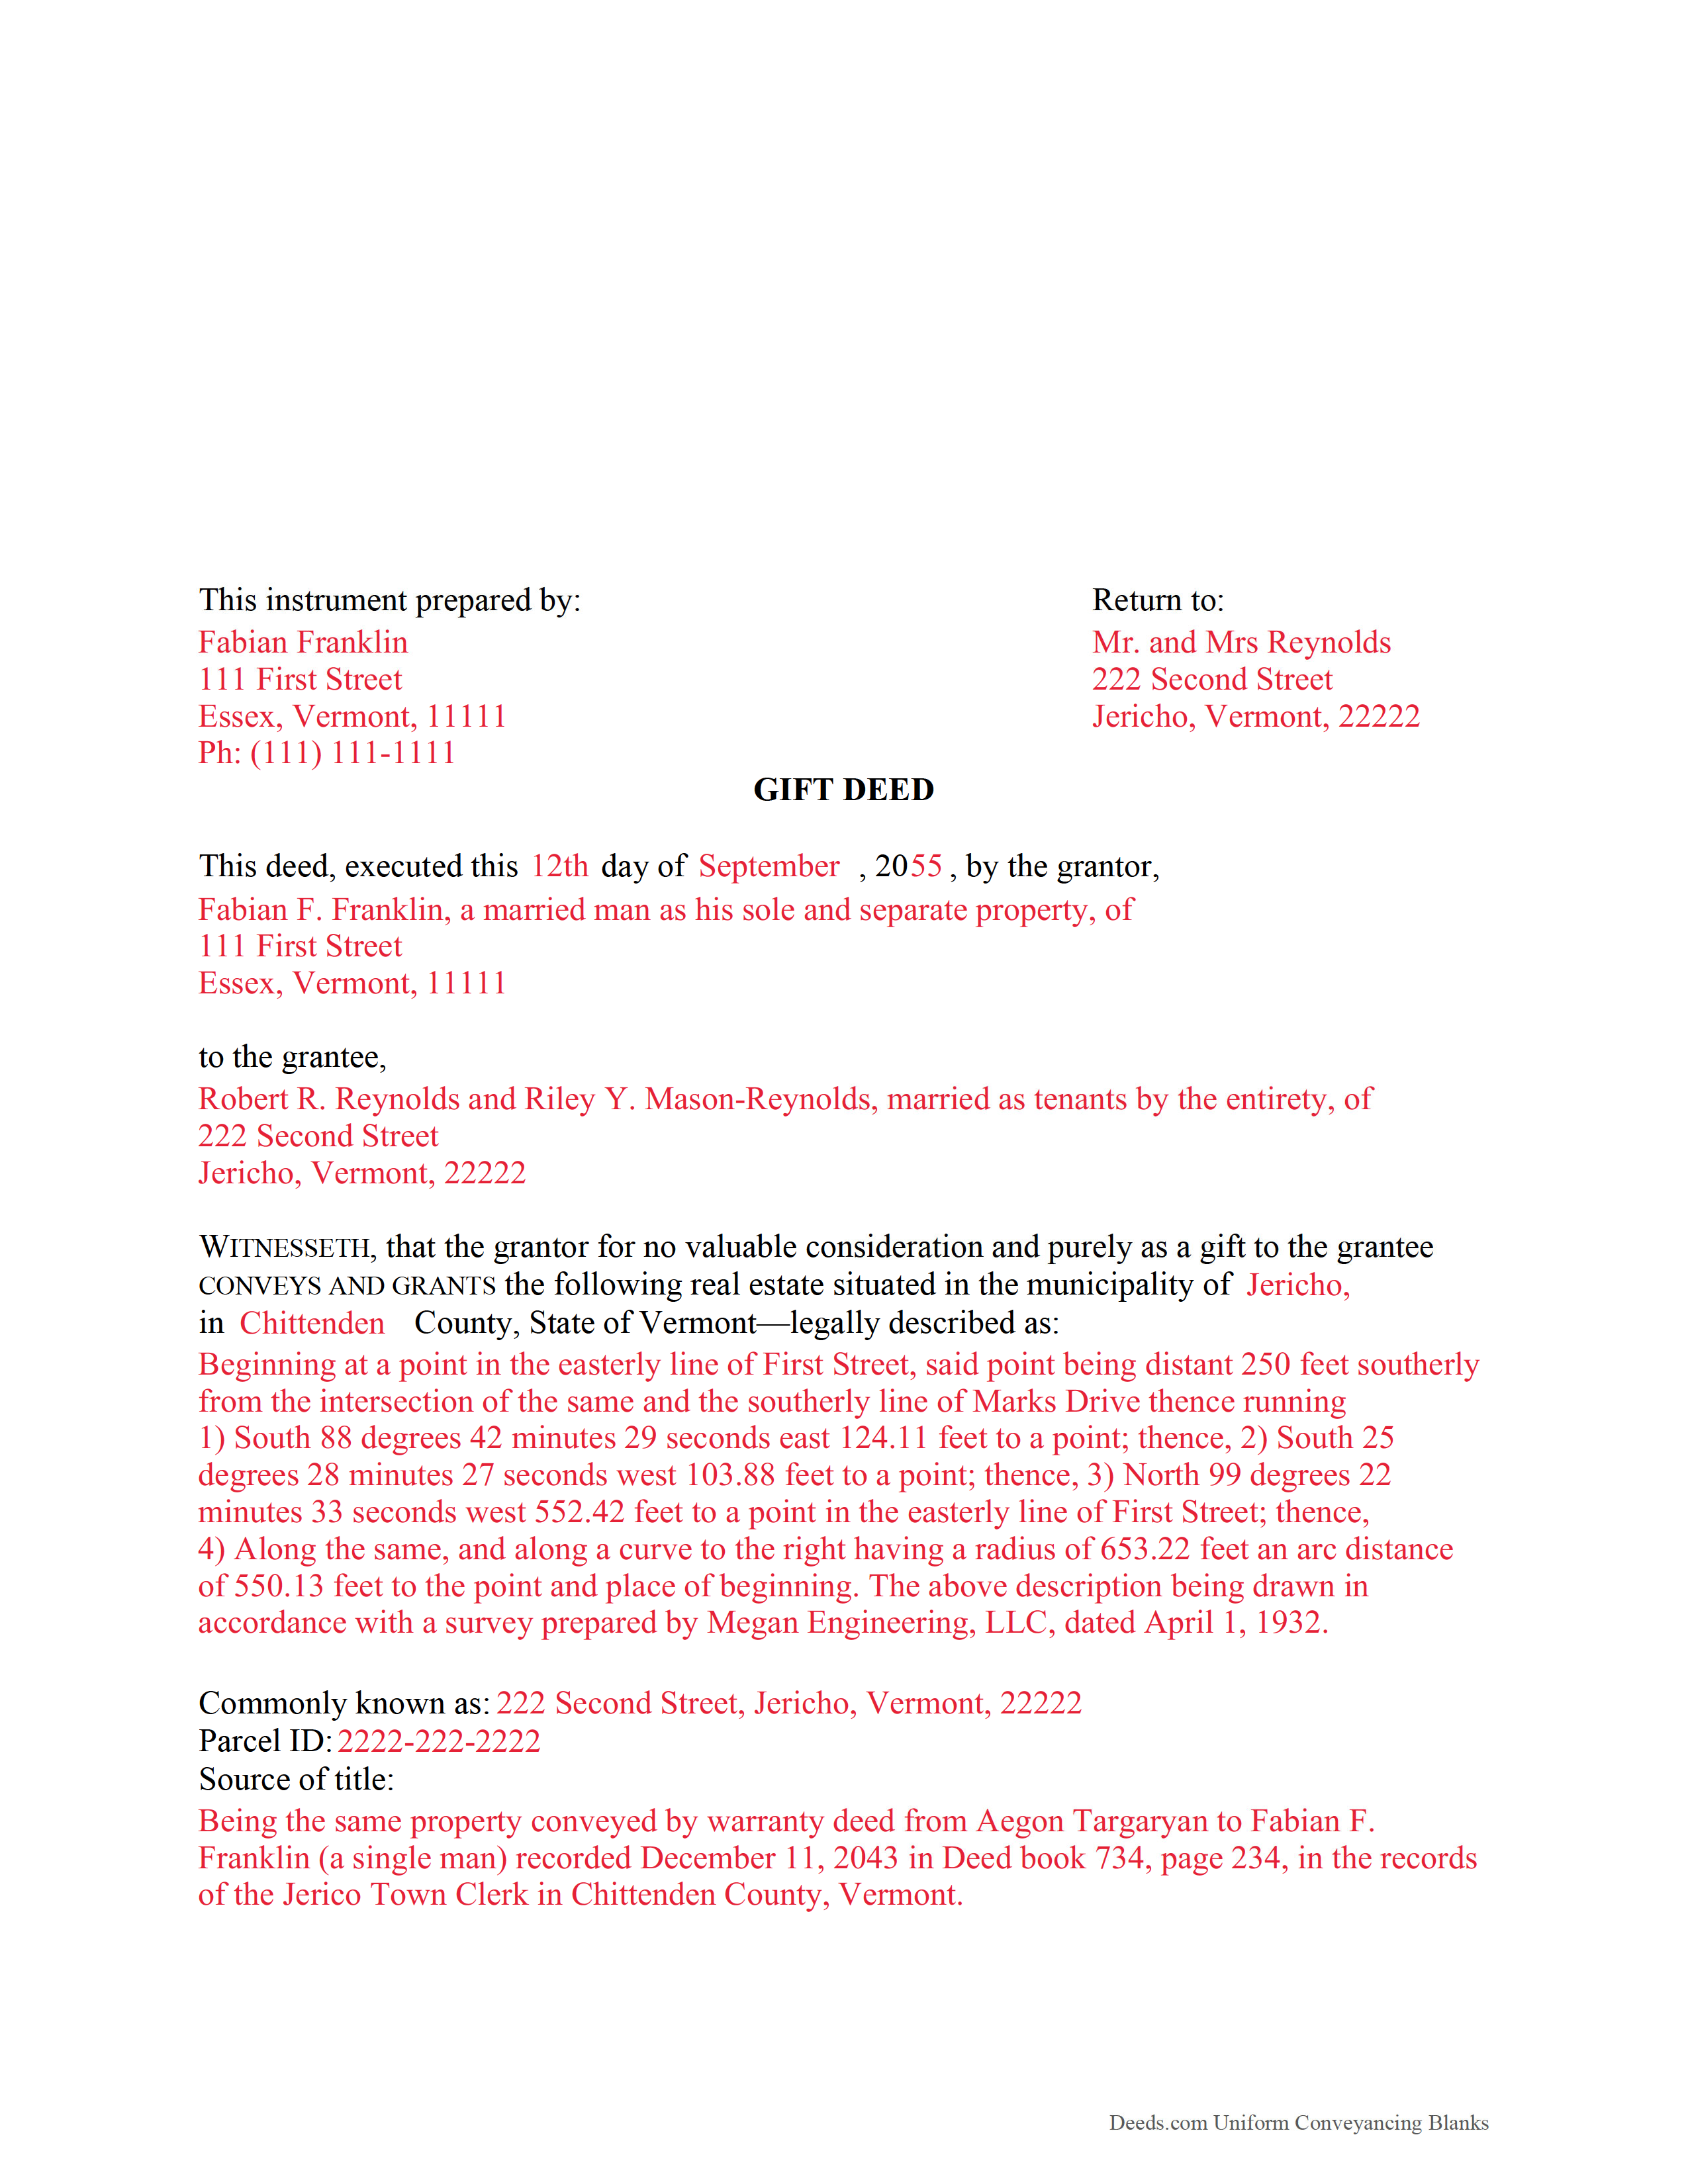 Completed Example of the Gift Deed Document